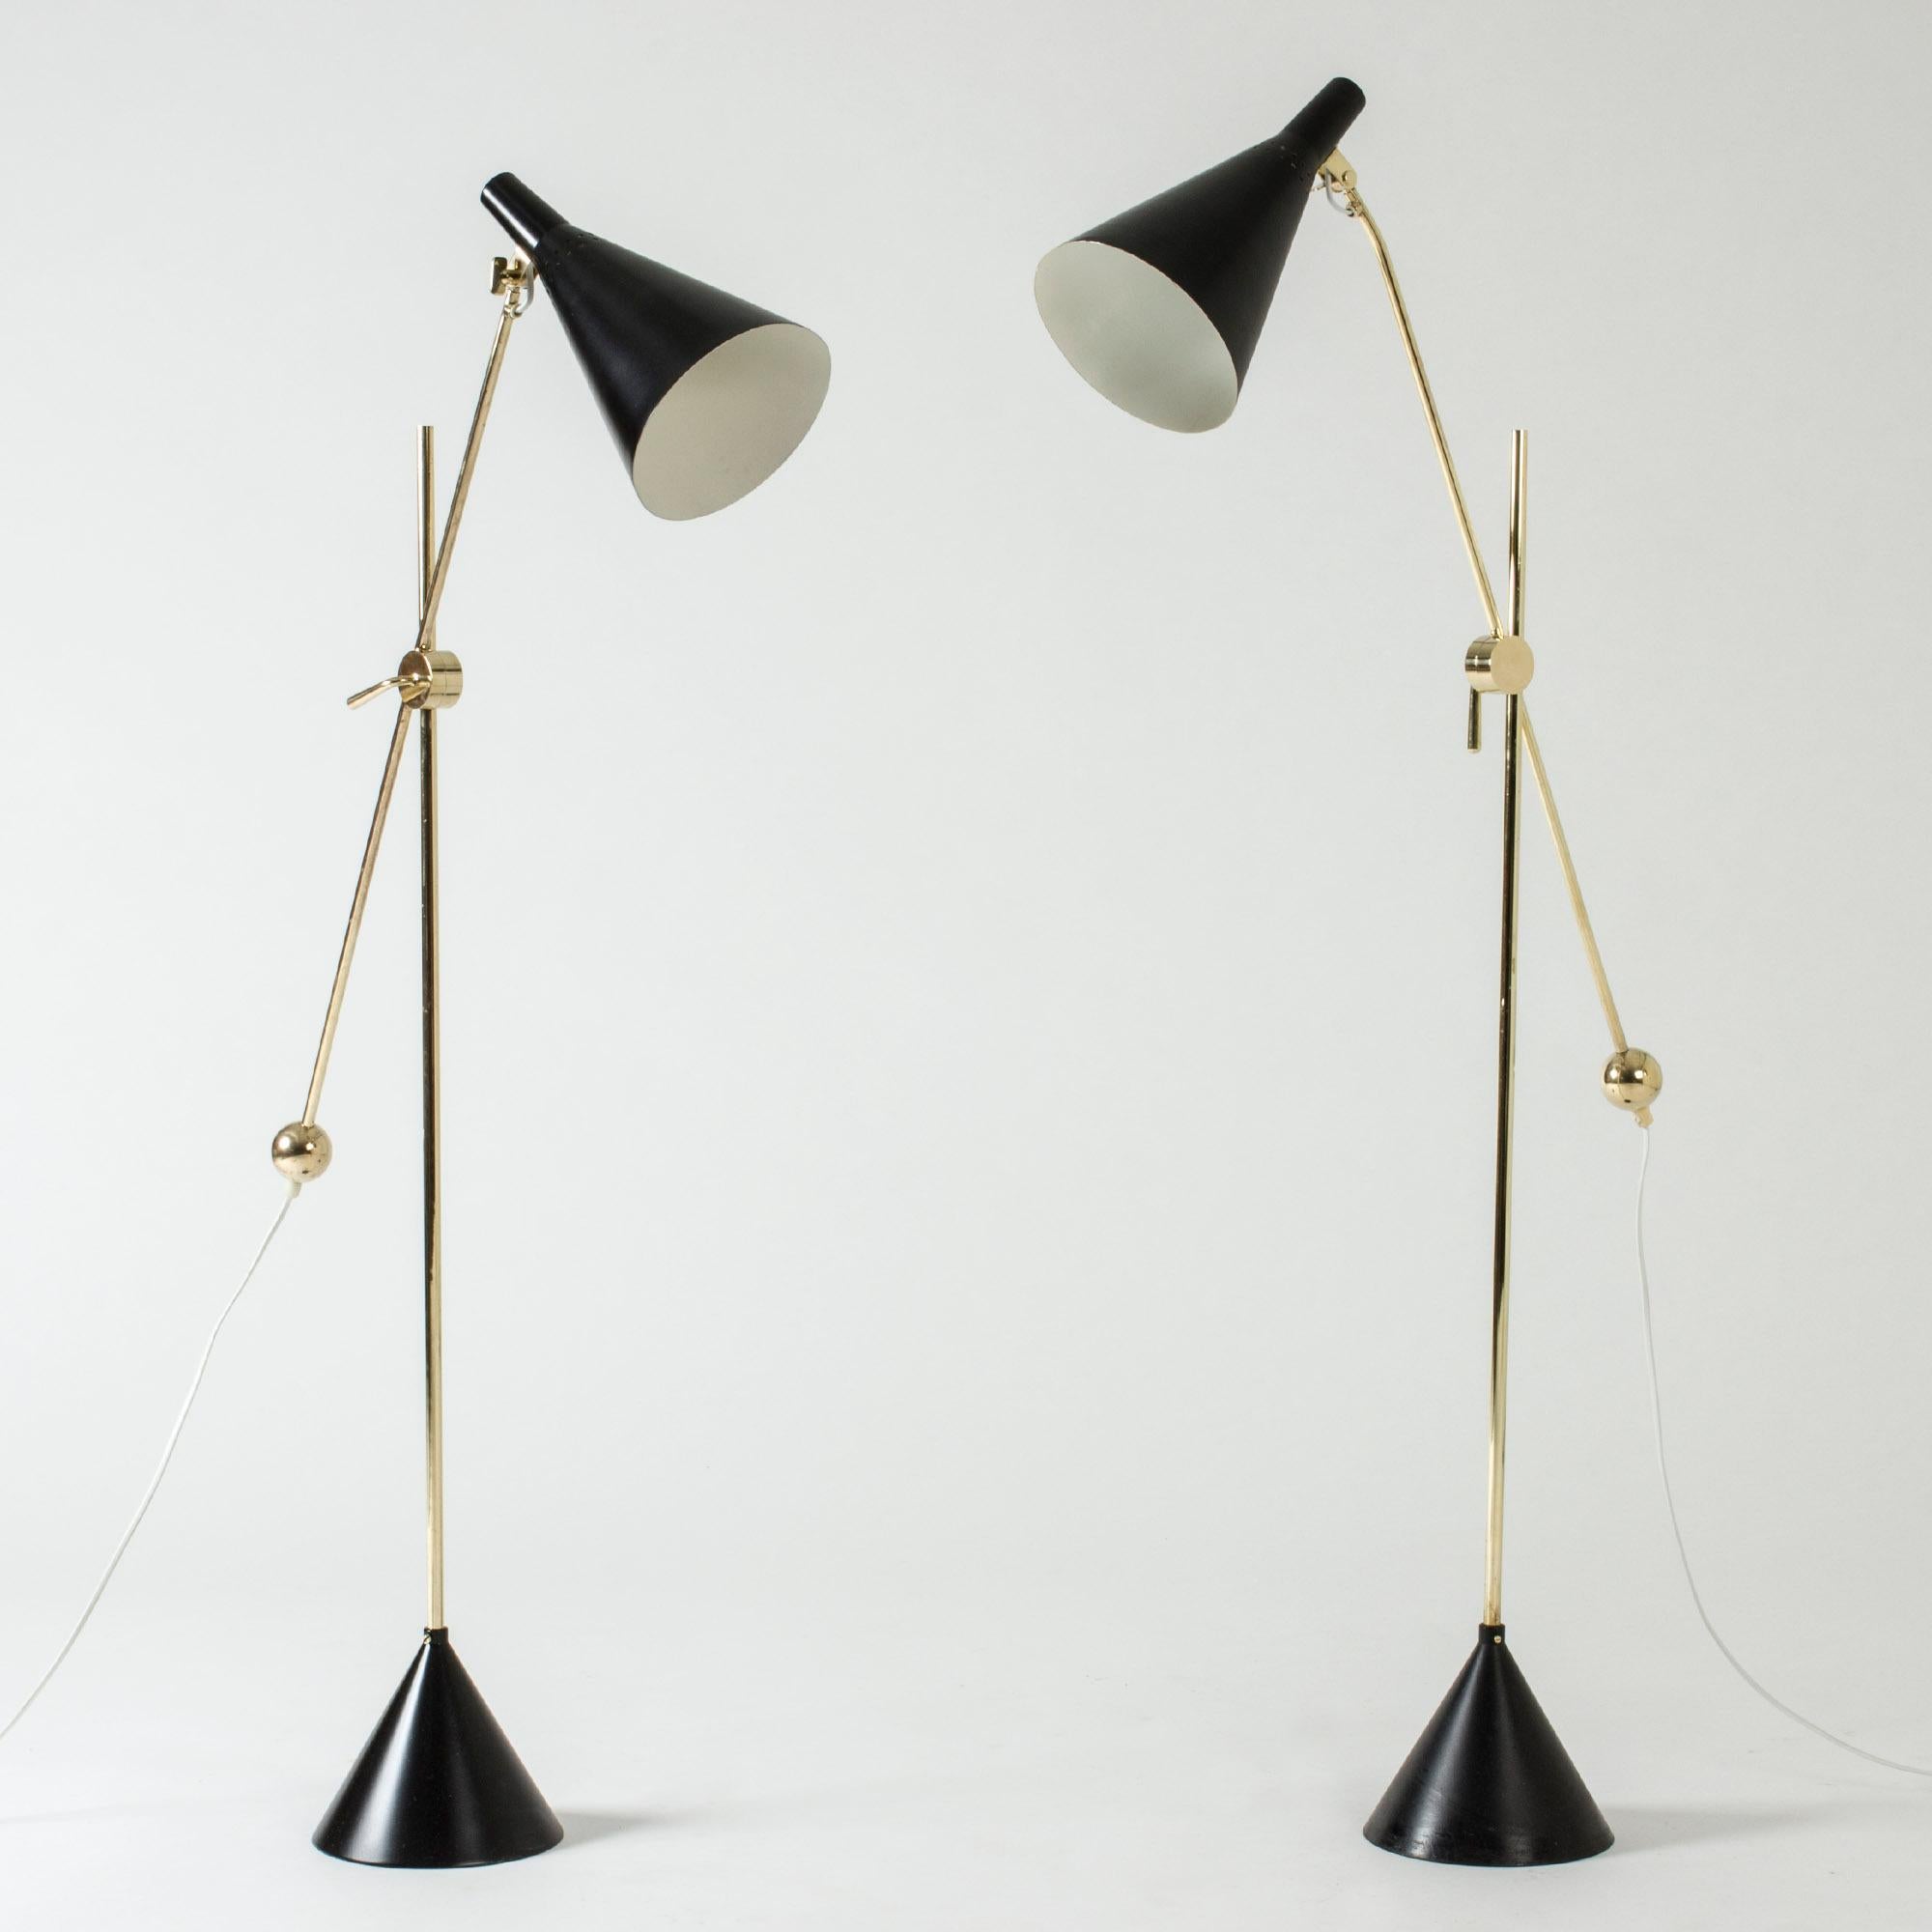 Scandinavian Modern Pair of Lacquered Metal and Brass Floor Lamps by Tapio Wirkkala for Idman Oy